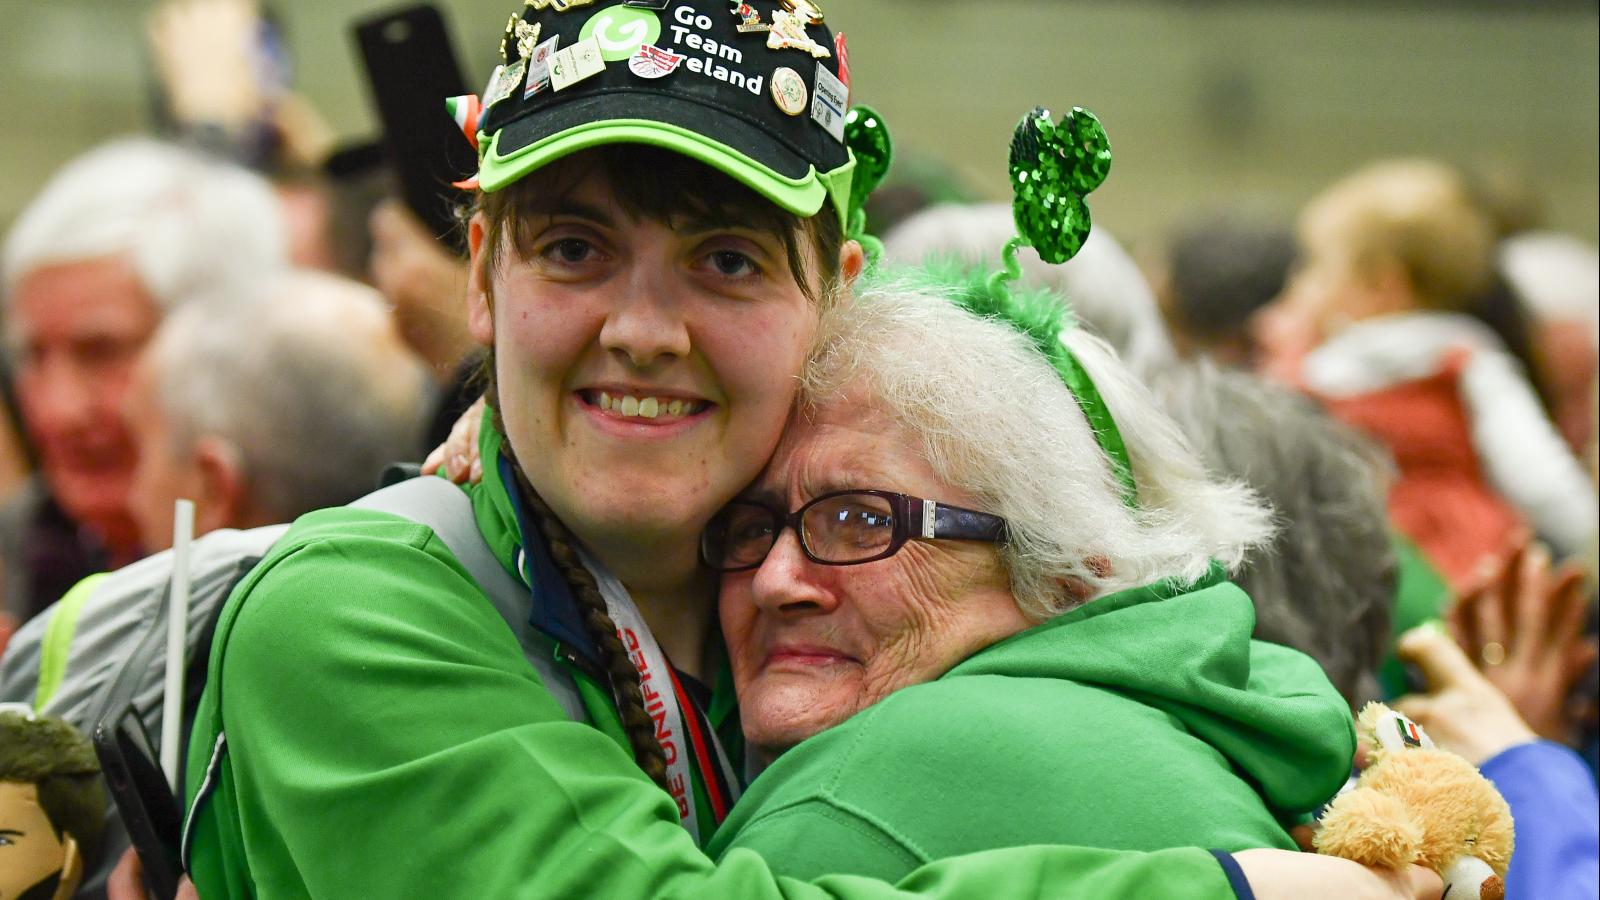 Athlete Sarah Gilmartin is welcomed home by her mother at Dublin Airport as she arrives back after the 2019 World Summer Games in Abu Dhabi